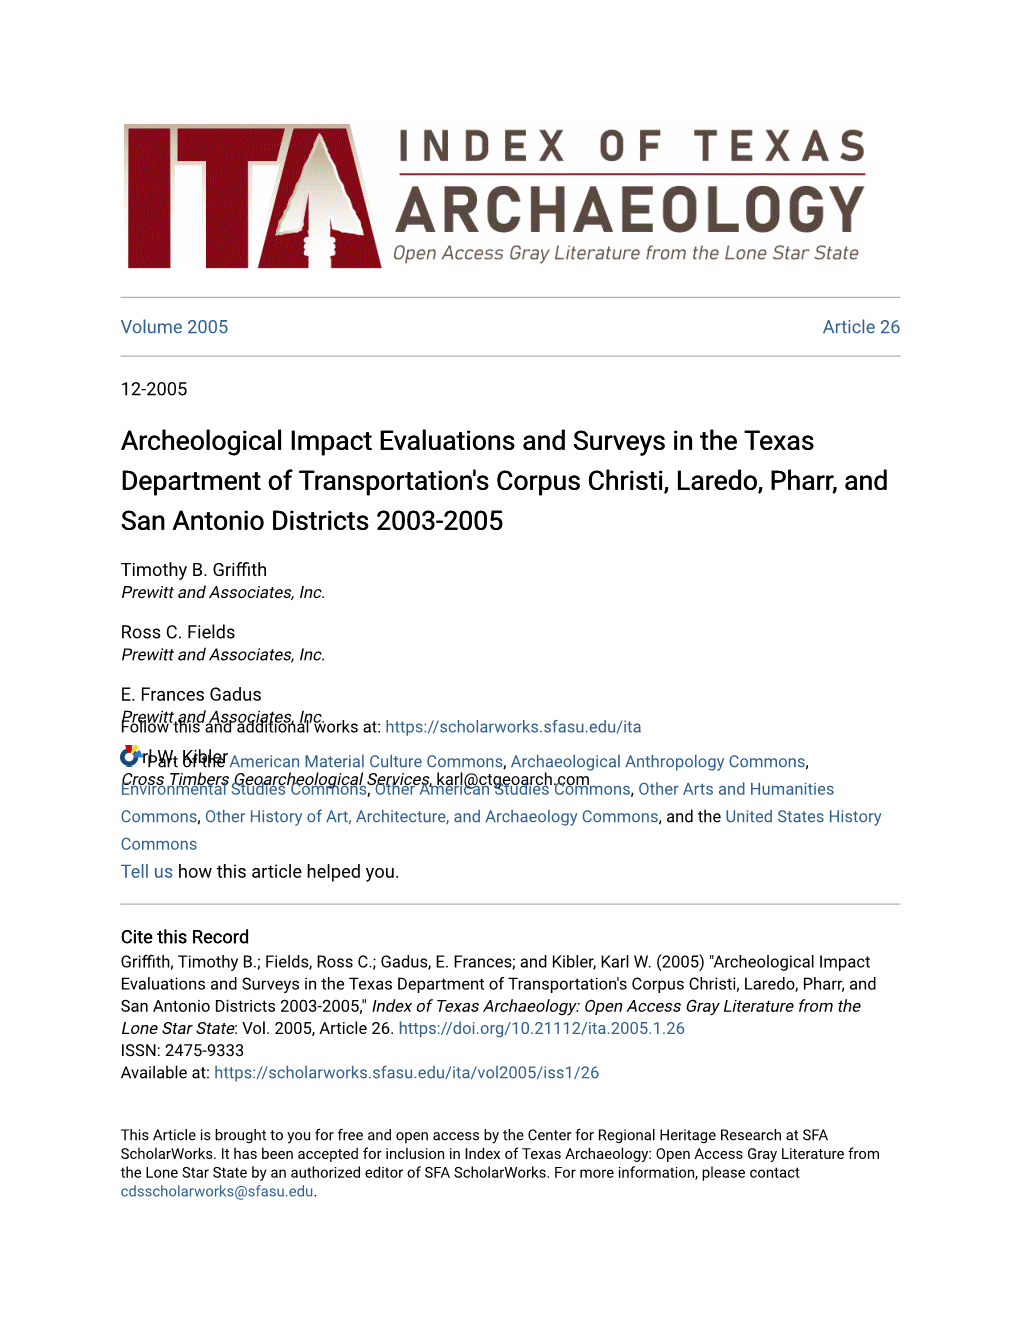 Archeological Impact Evaluations and Surveys in the Texas Department of Transportation's Corpus Christi, Laredo, Pharr, and San Antonio Districts 2003-2005